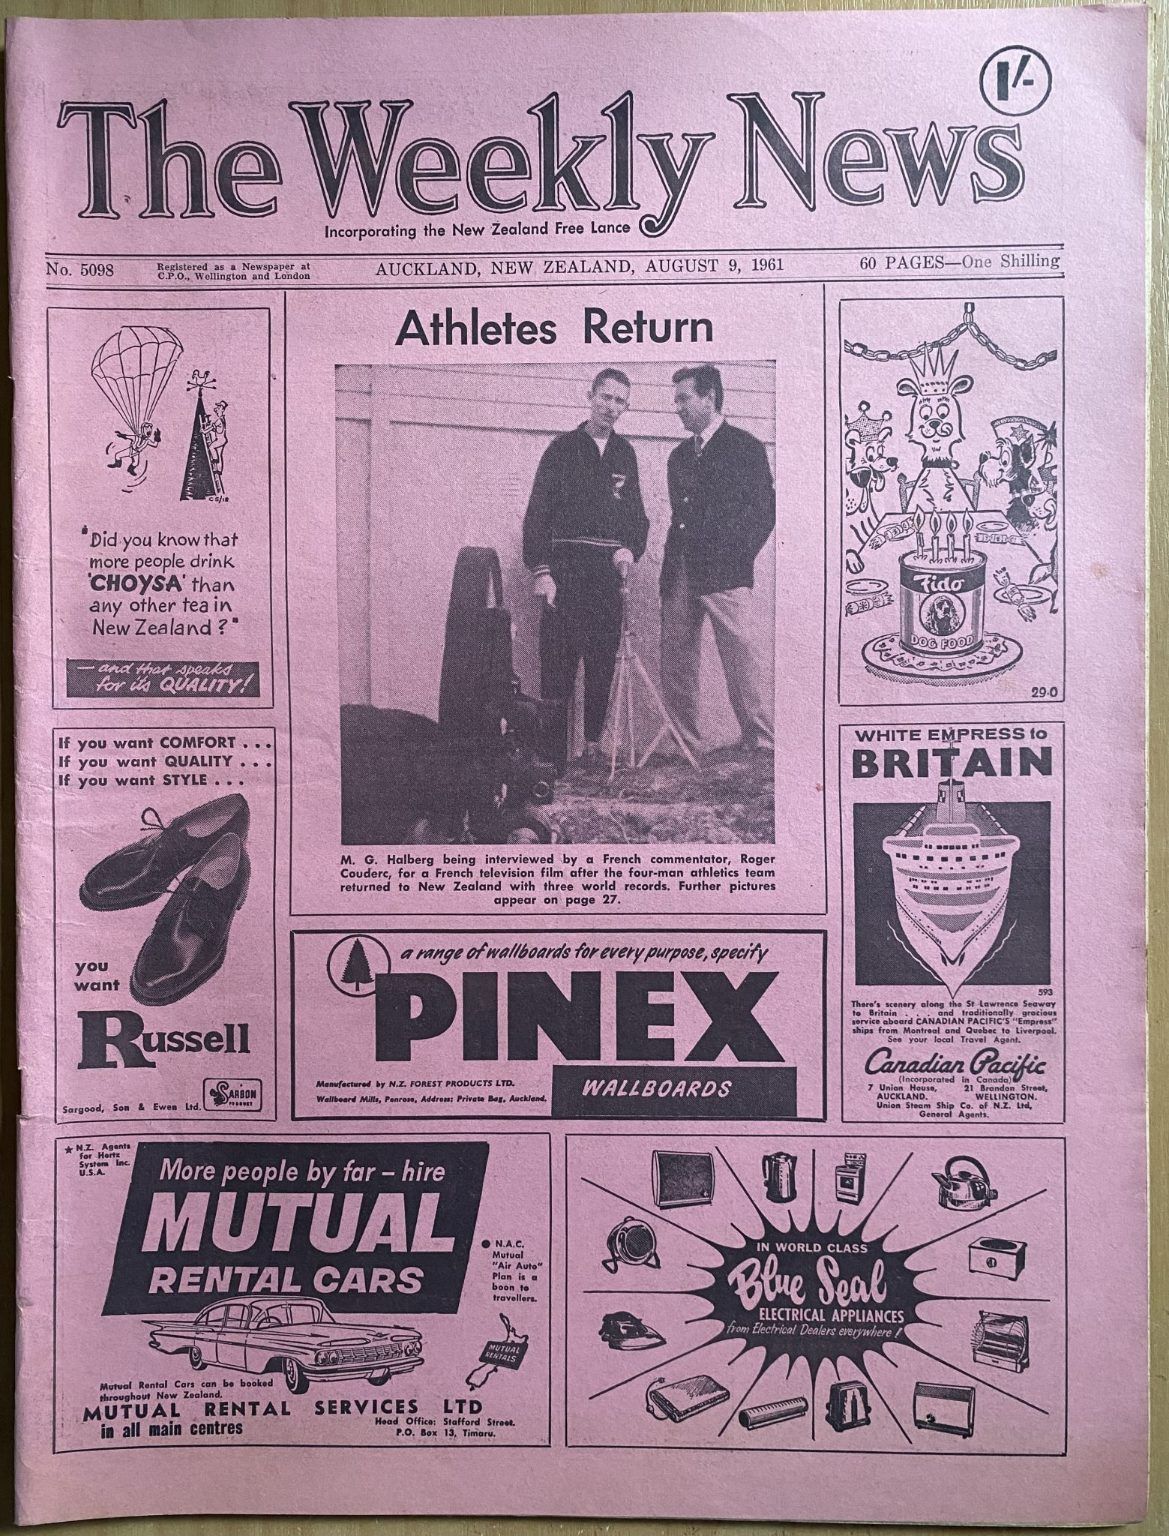 OLD NEWSPAPER: The Weekly News, No. 5098, 9 August 1961